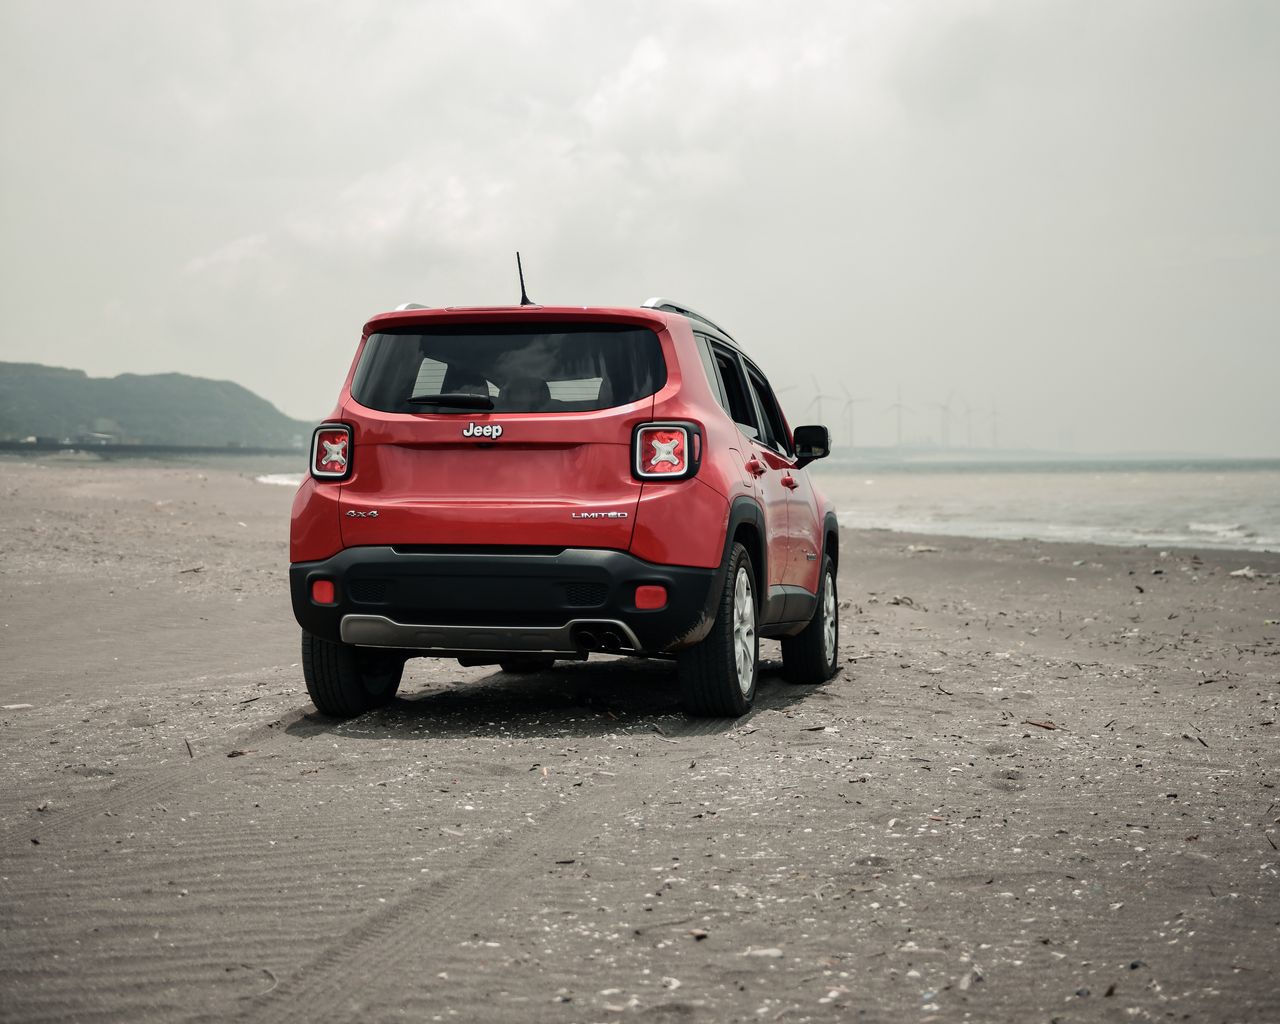 Download wallpaper 1280x1024 jeep renegade jeep suv red rear